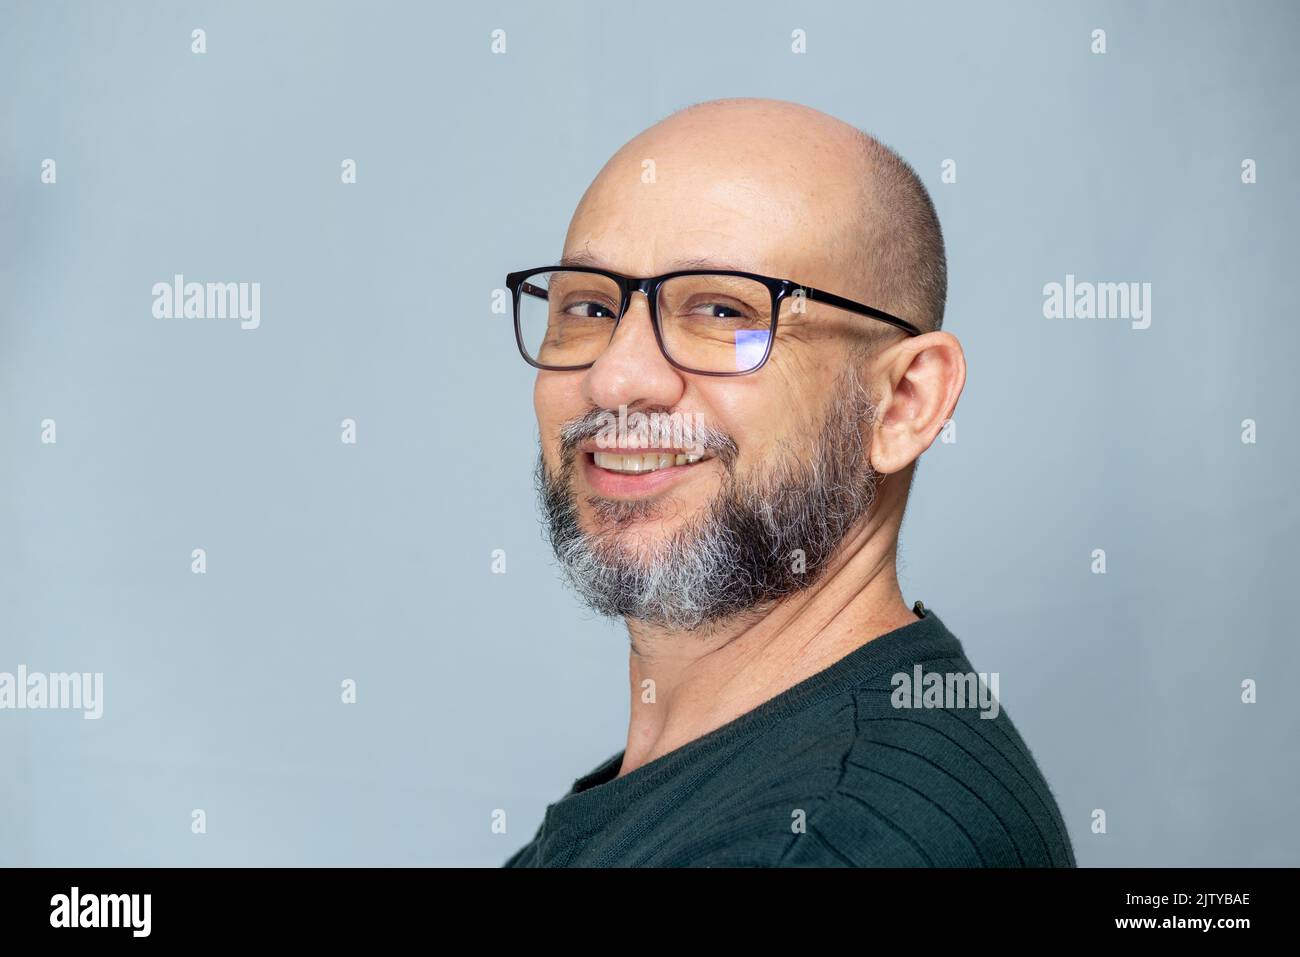 Portrait of mature man standing on light background. Bearded bald man in glasses. Formal style. Stock Photo